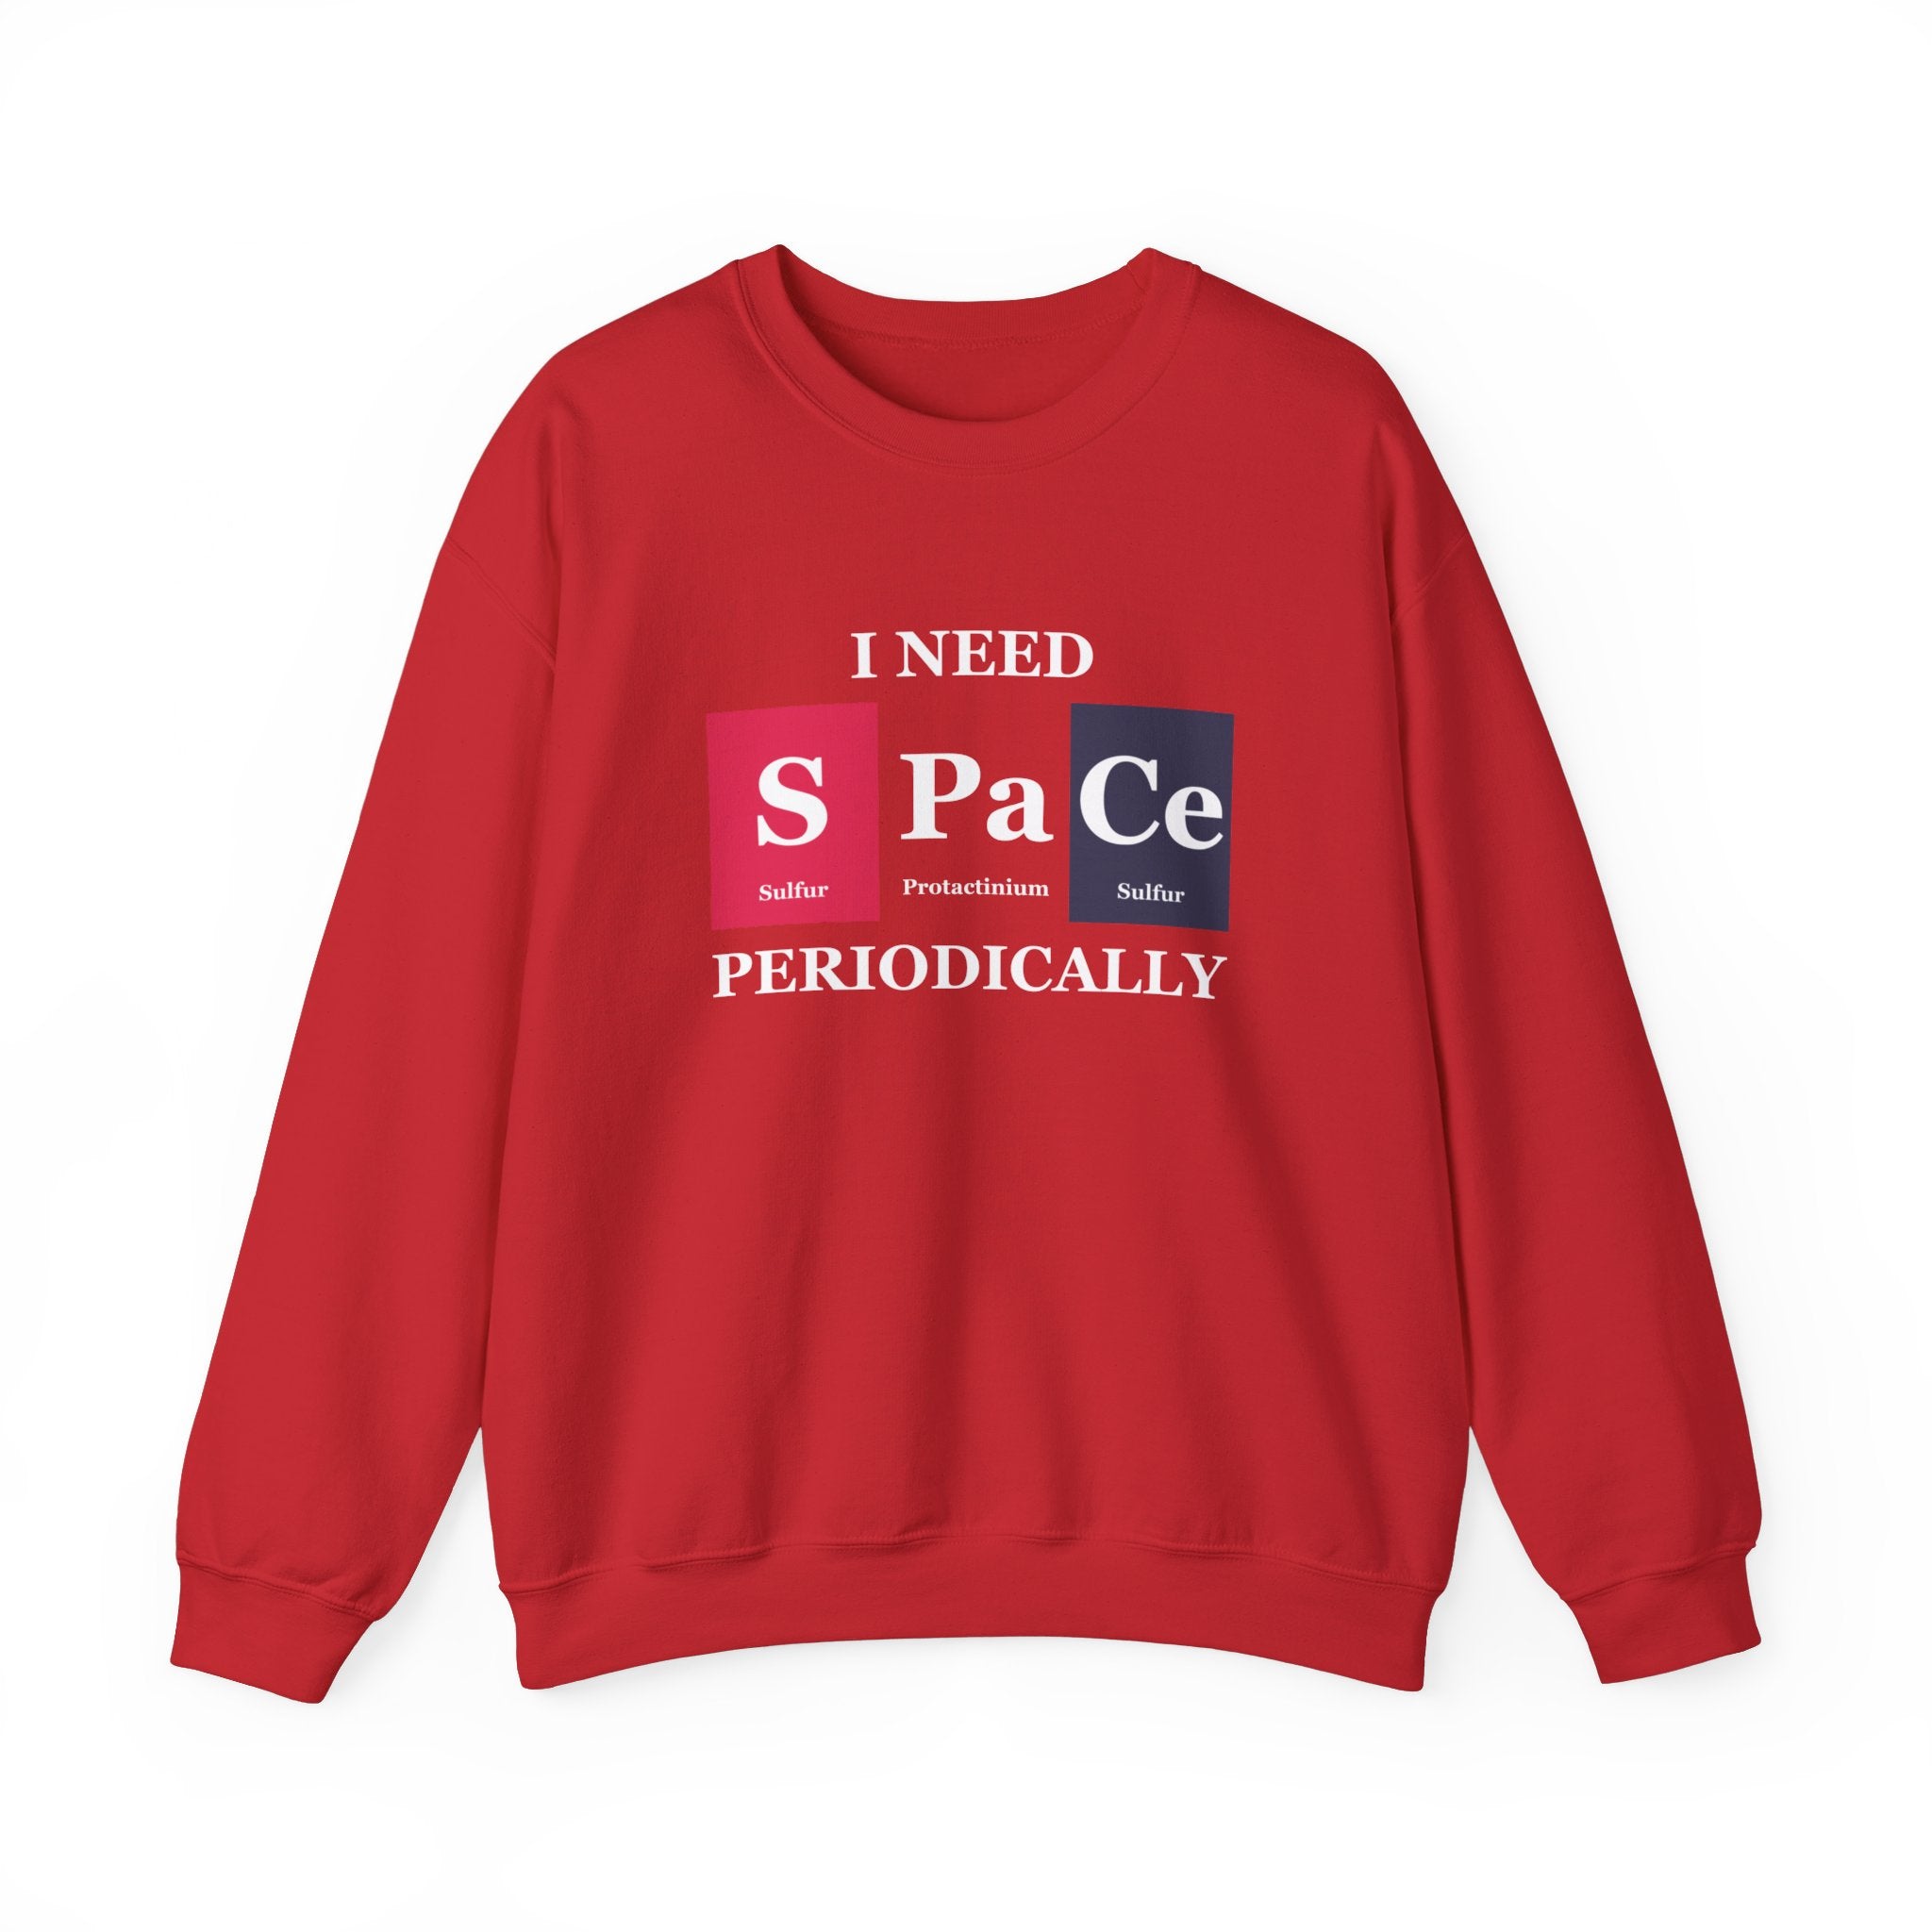 A cozy red S-Pa-Ce - Sweatshirt perfect for winter, featuring the text "I NEED SPACE PERIODICALLY" with elements from the periodic table: Sulfur (S), Protactinium (Pa), and Cerium (Ce).